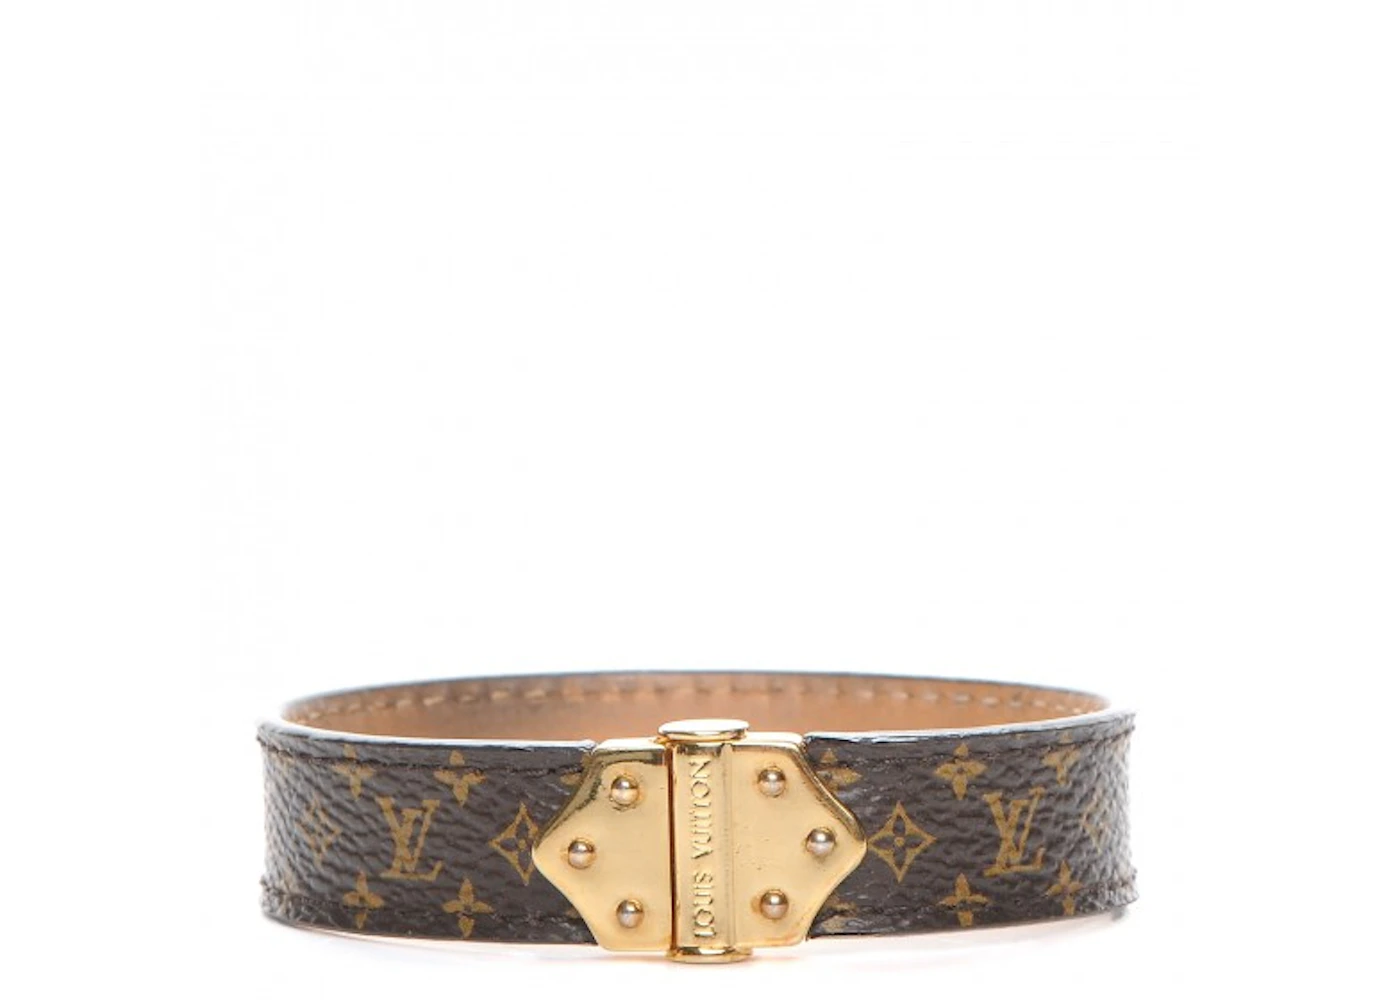 how to tell if a louis vuitton bracelet is real